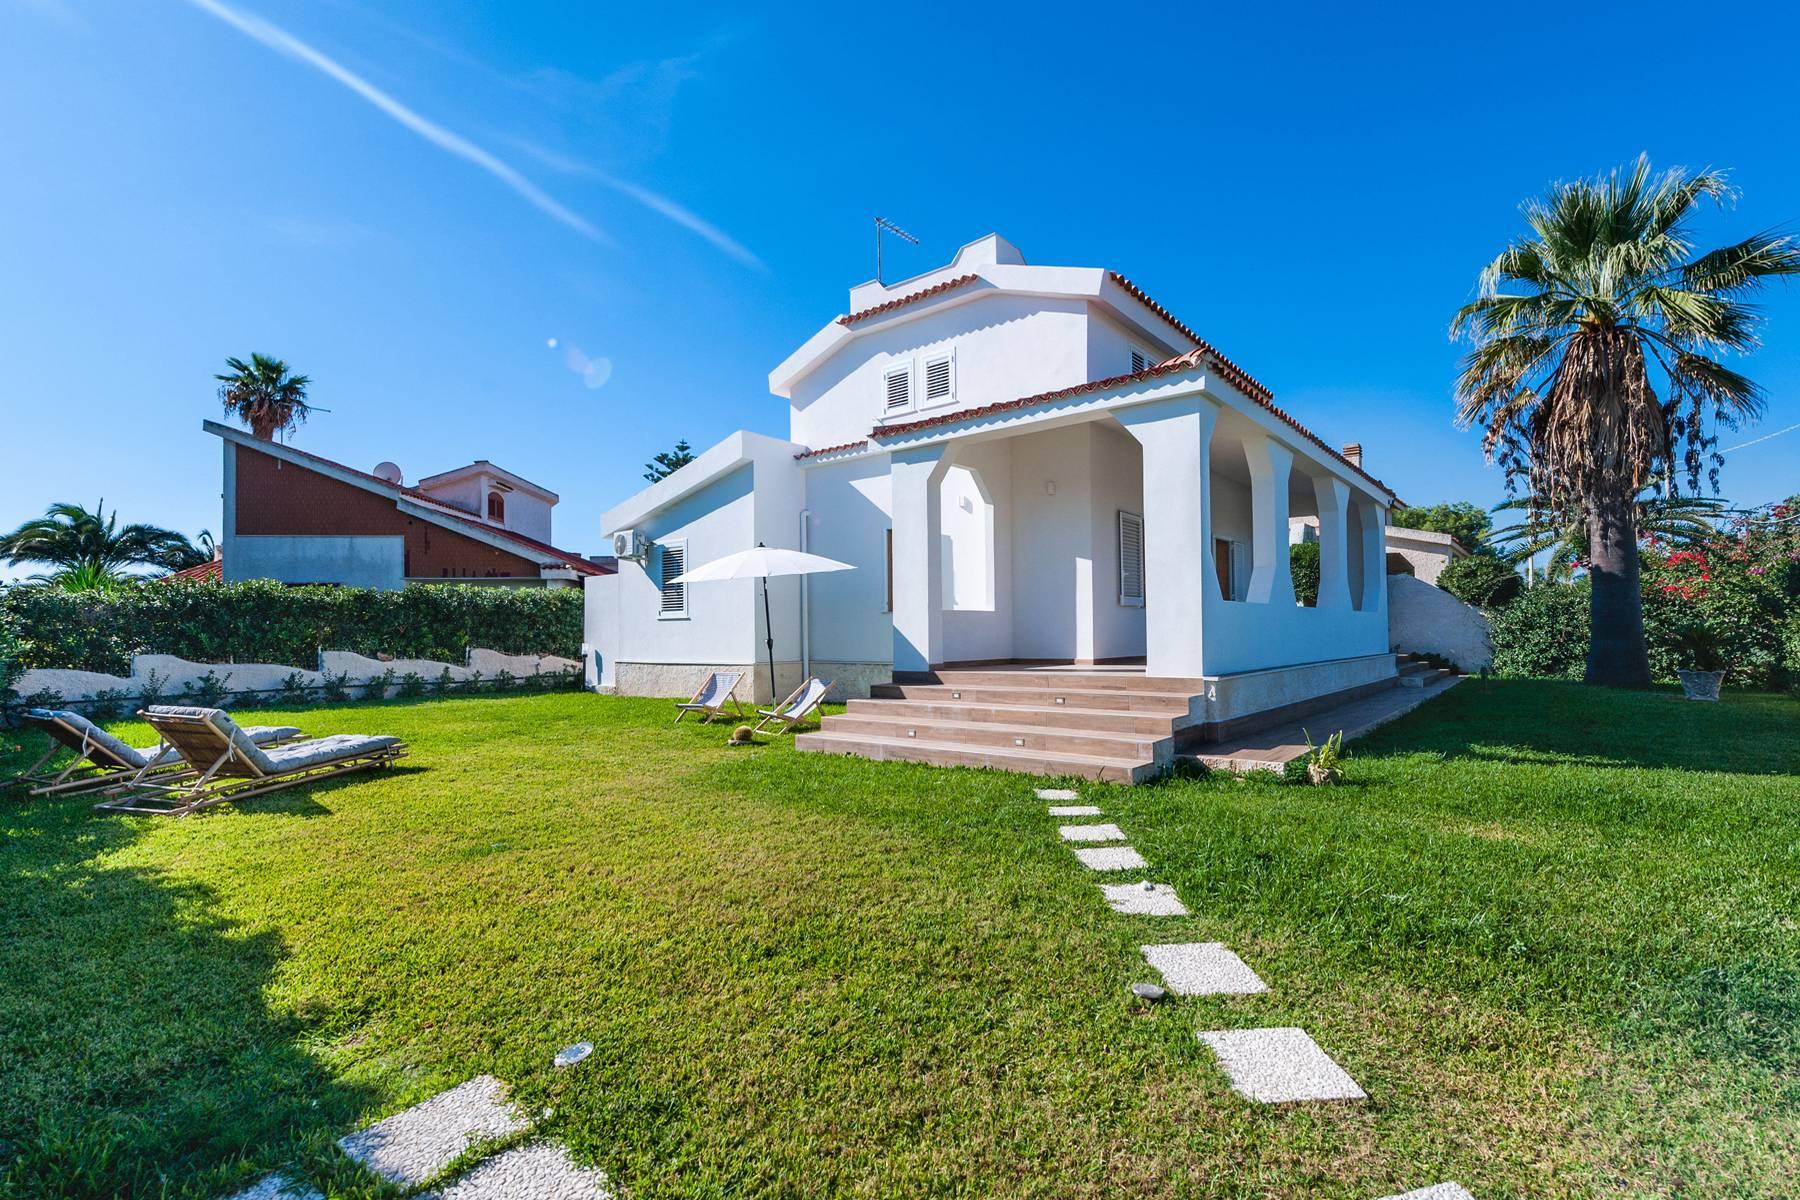 Villa in the Plemmirio Marine Protected Area with direct access to the sea - 2